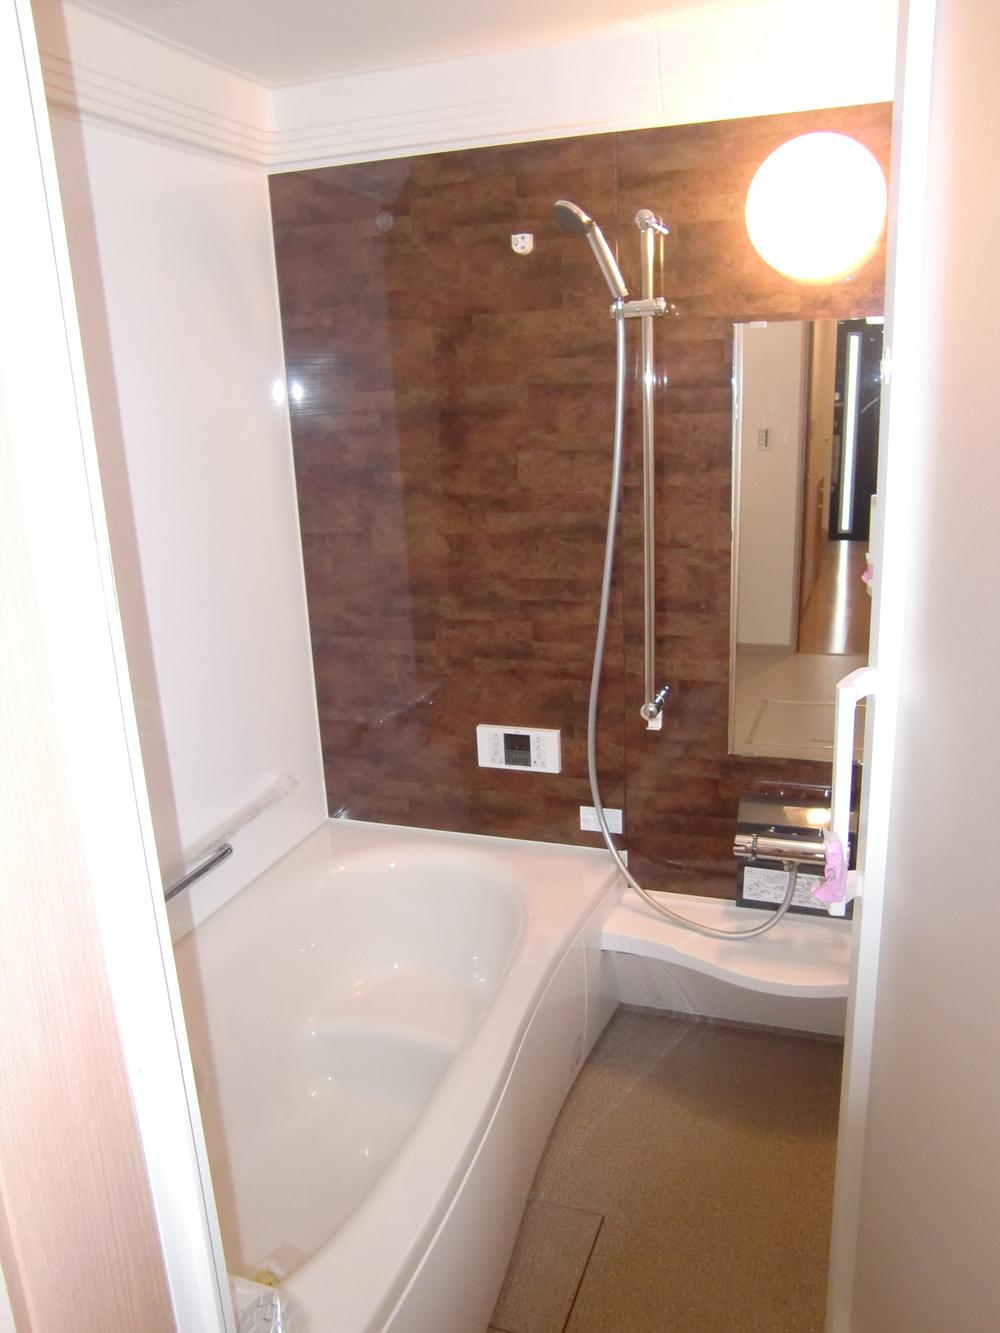 Same specifications photo (bathroom). ◇ bathroom construction cases (same specifications) ◇